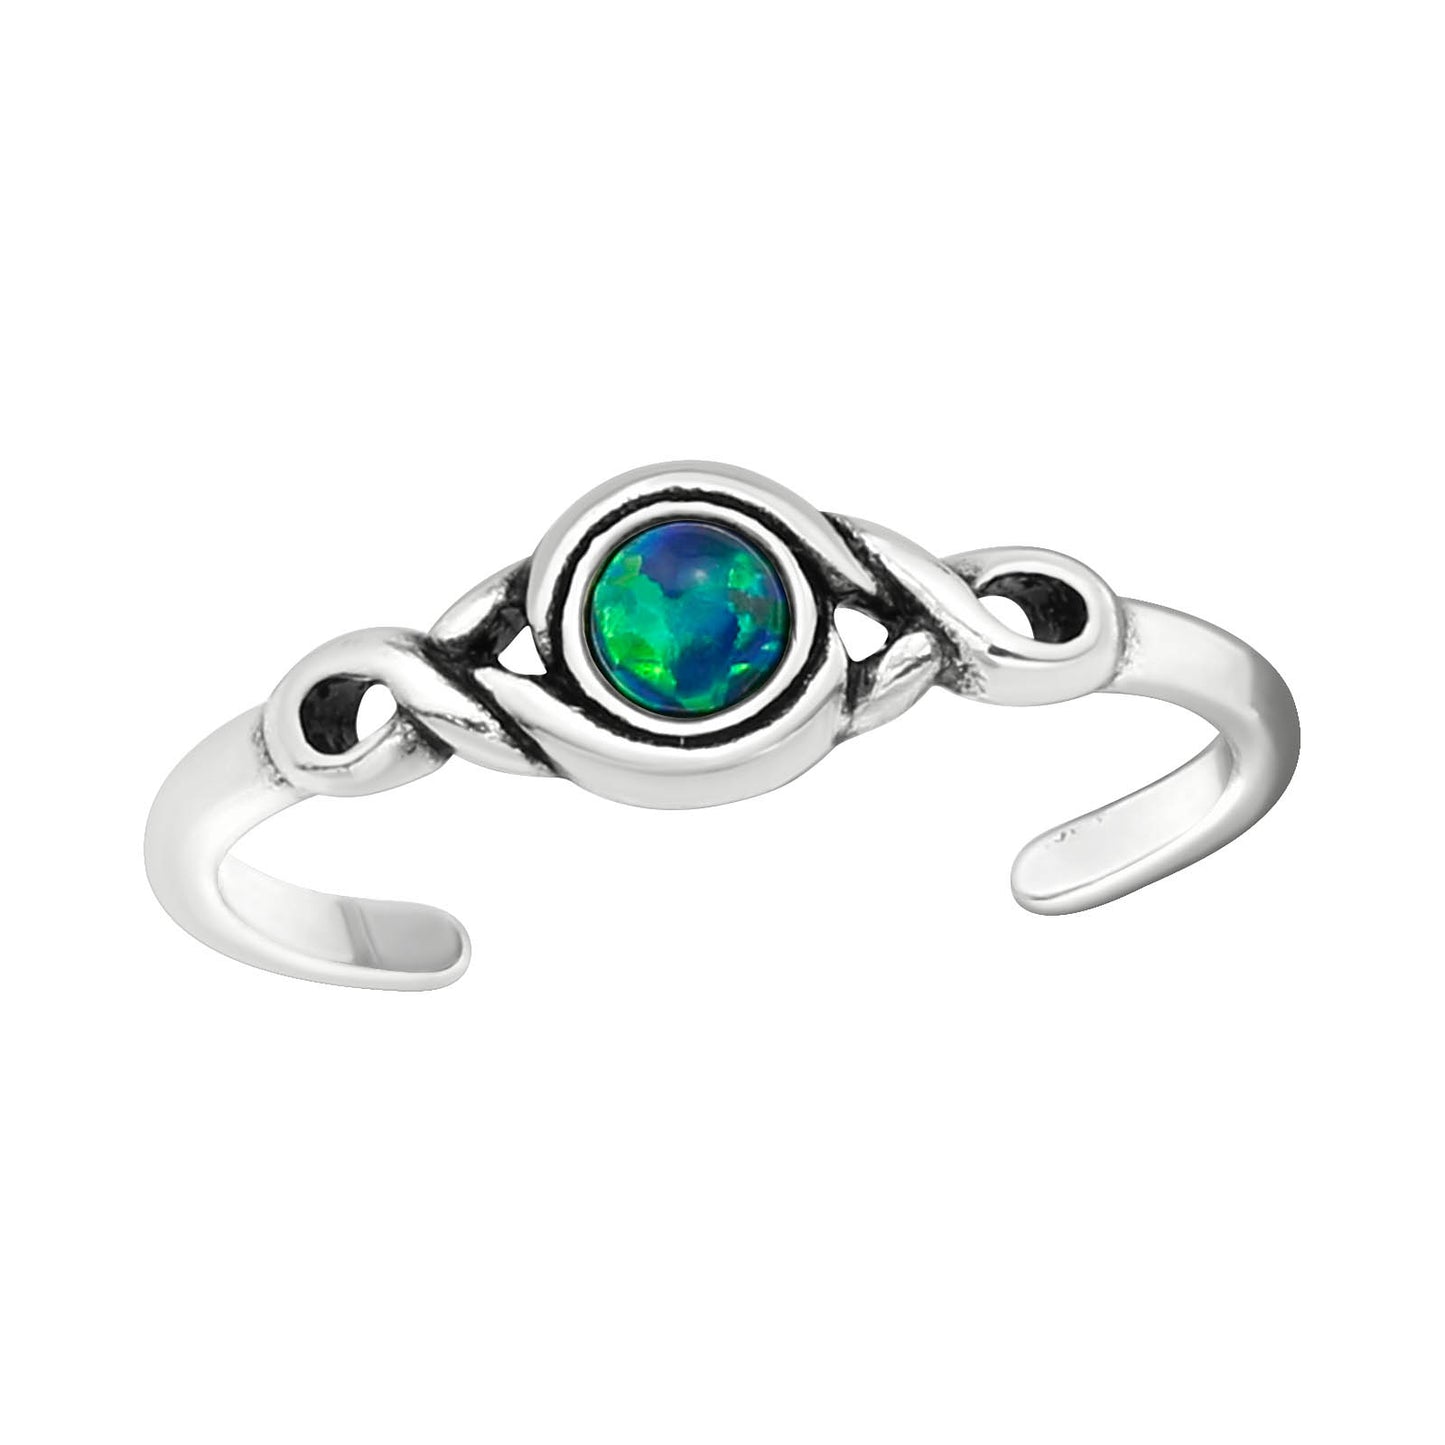 Adjustable Opal Toe Ring - Made from Oxidised Sterling Silver (imitation opal)